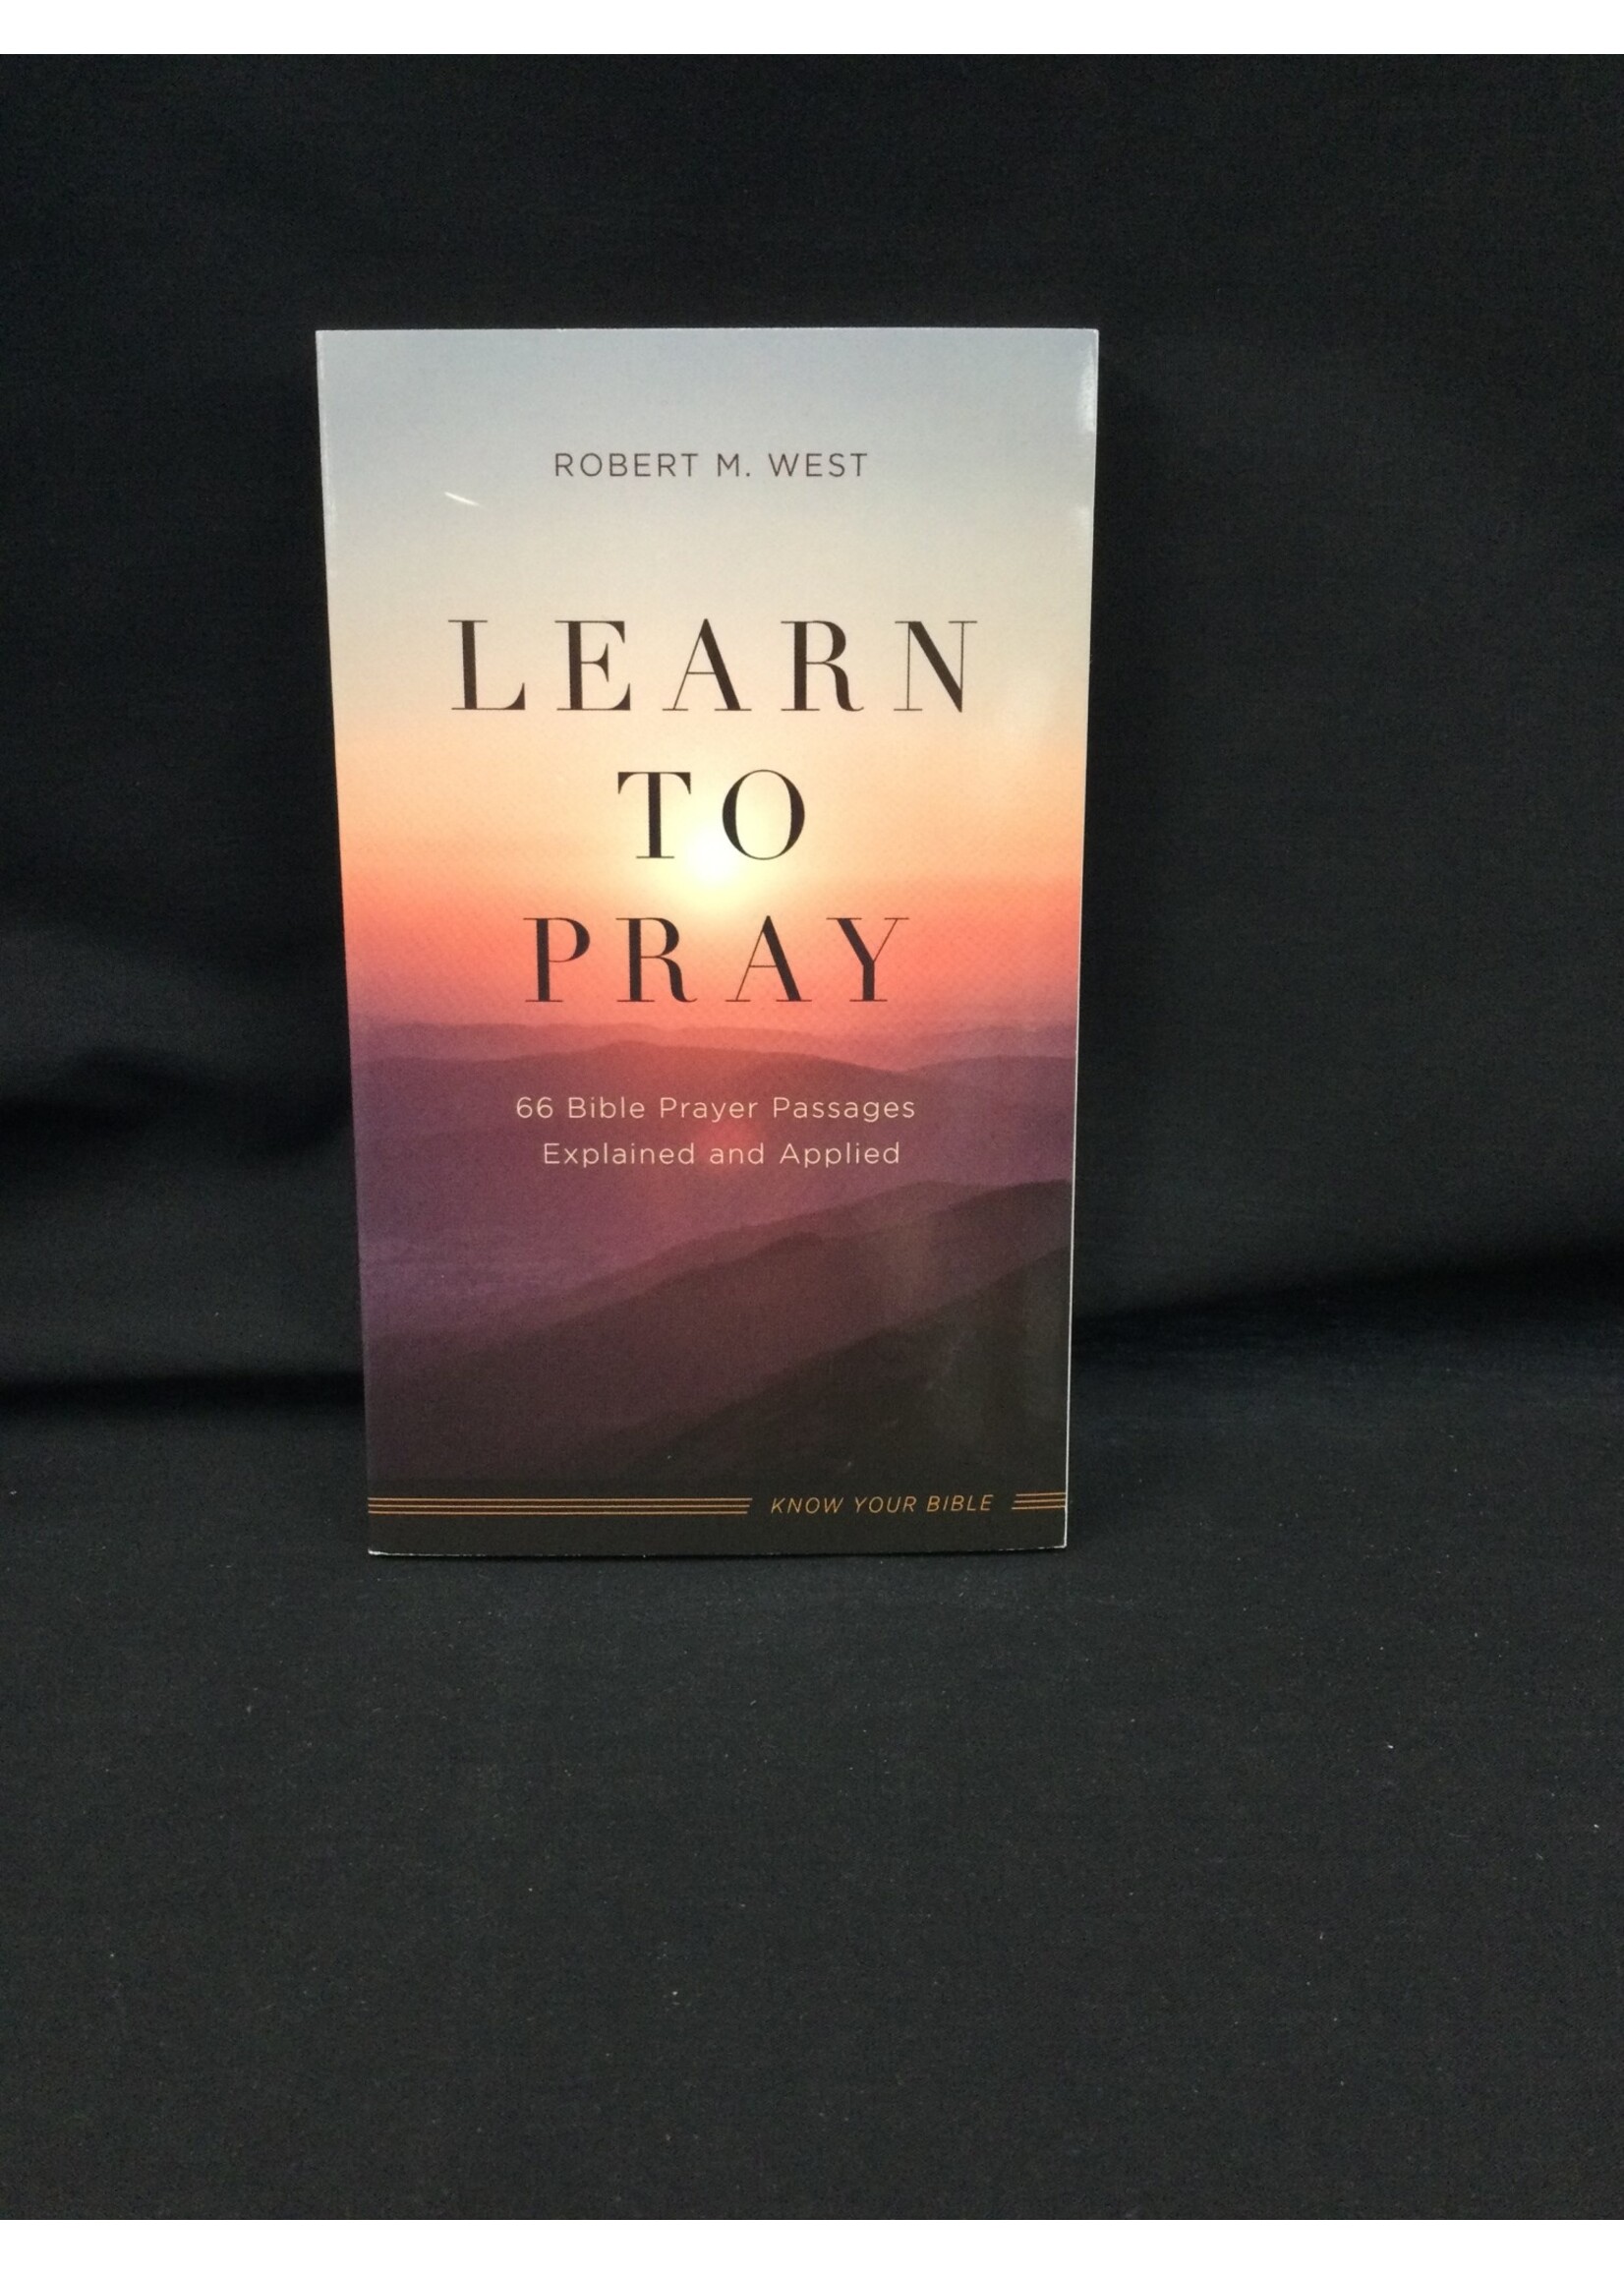 LEARN TO PRAY